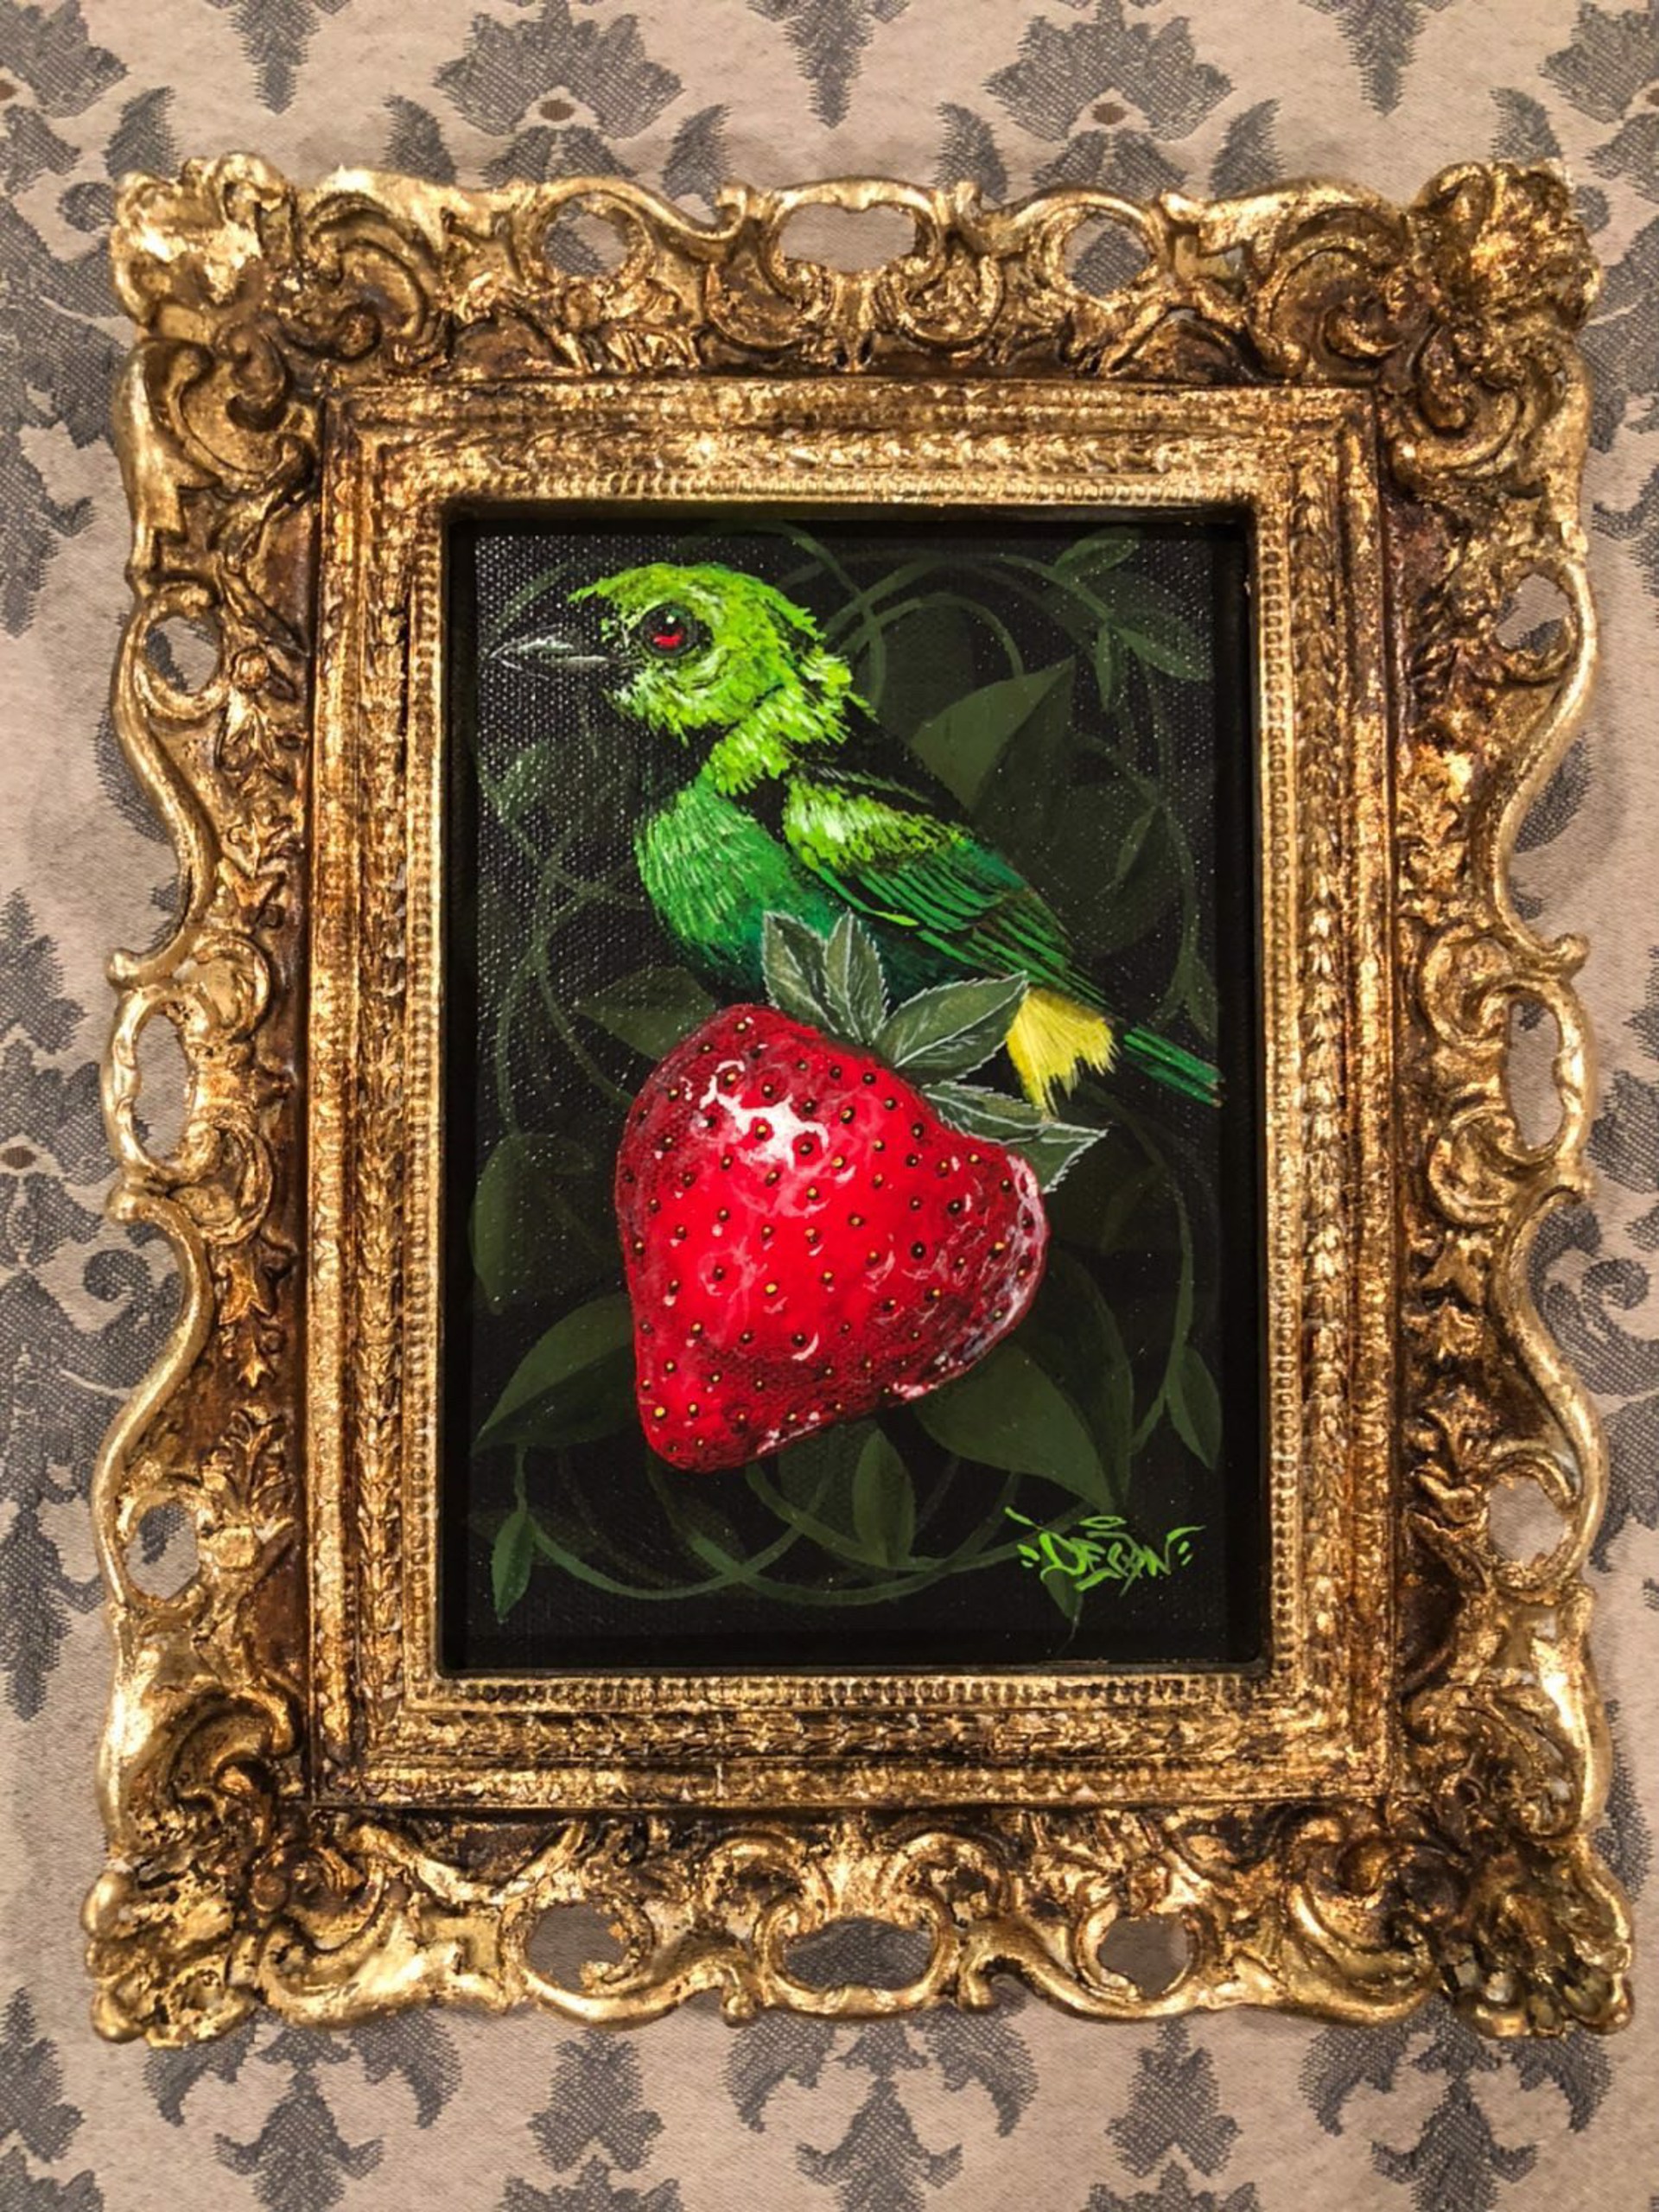 Strawberry by Anthony Deon Brown